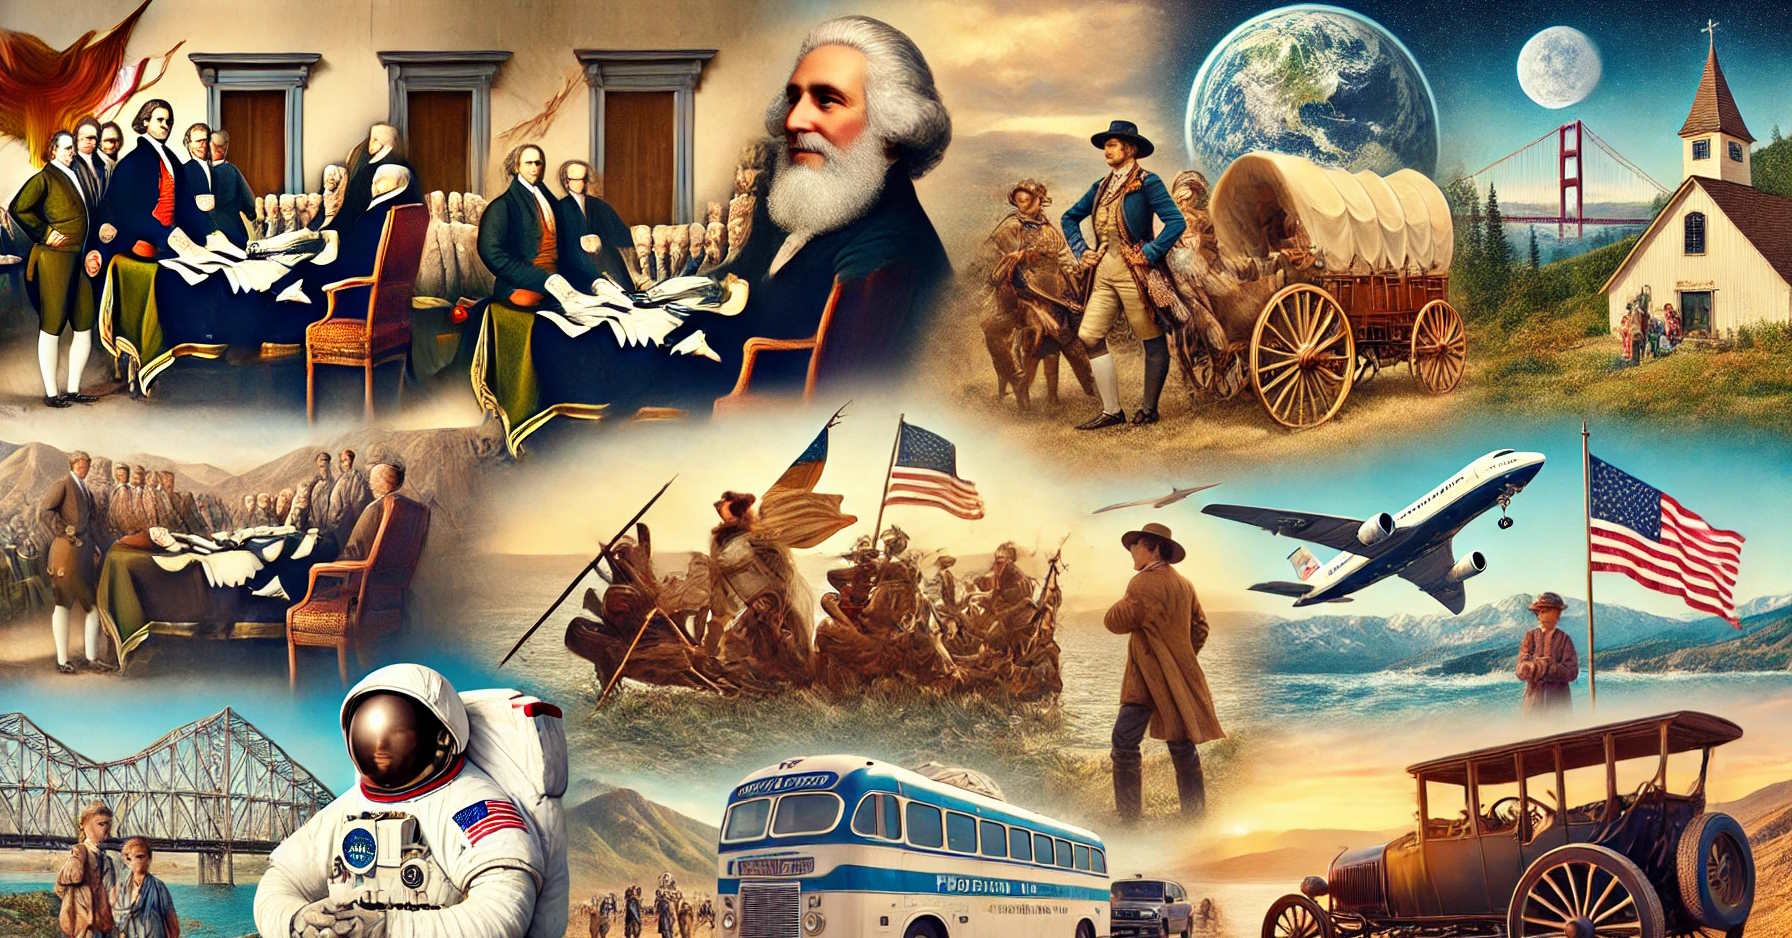 Collage of scenes depicting seminal moments in American history involving travel.